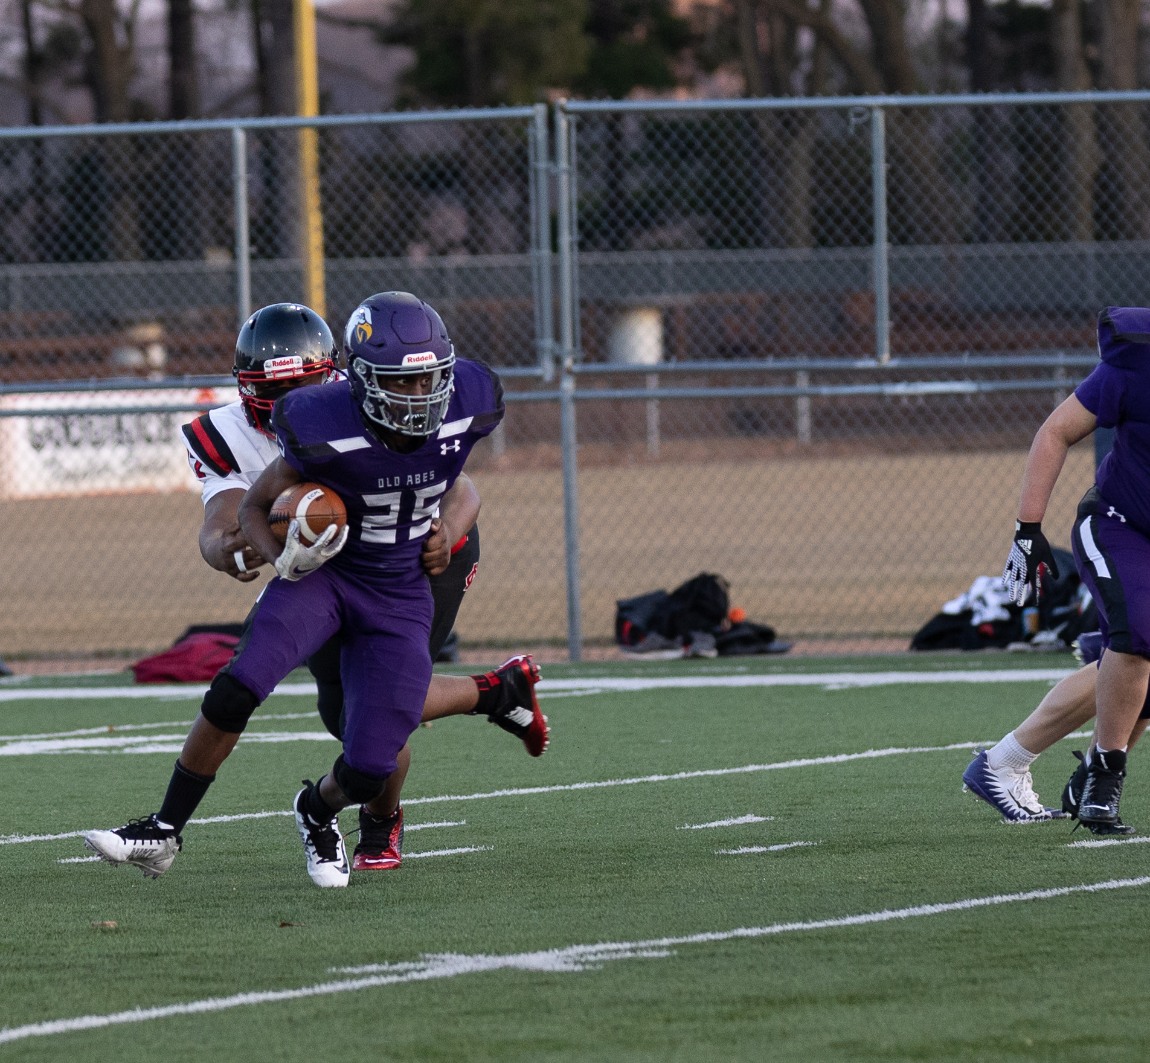 Eau-Claire-Memorial-JV-Football-LaCrosse-Central-at-Home-3-29-21-1539